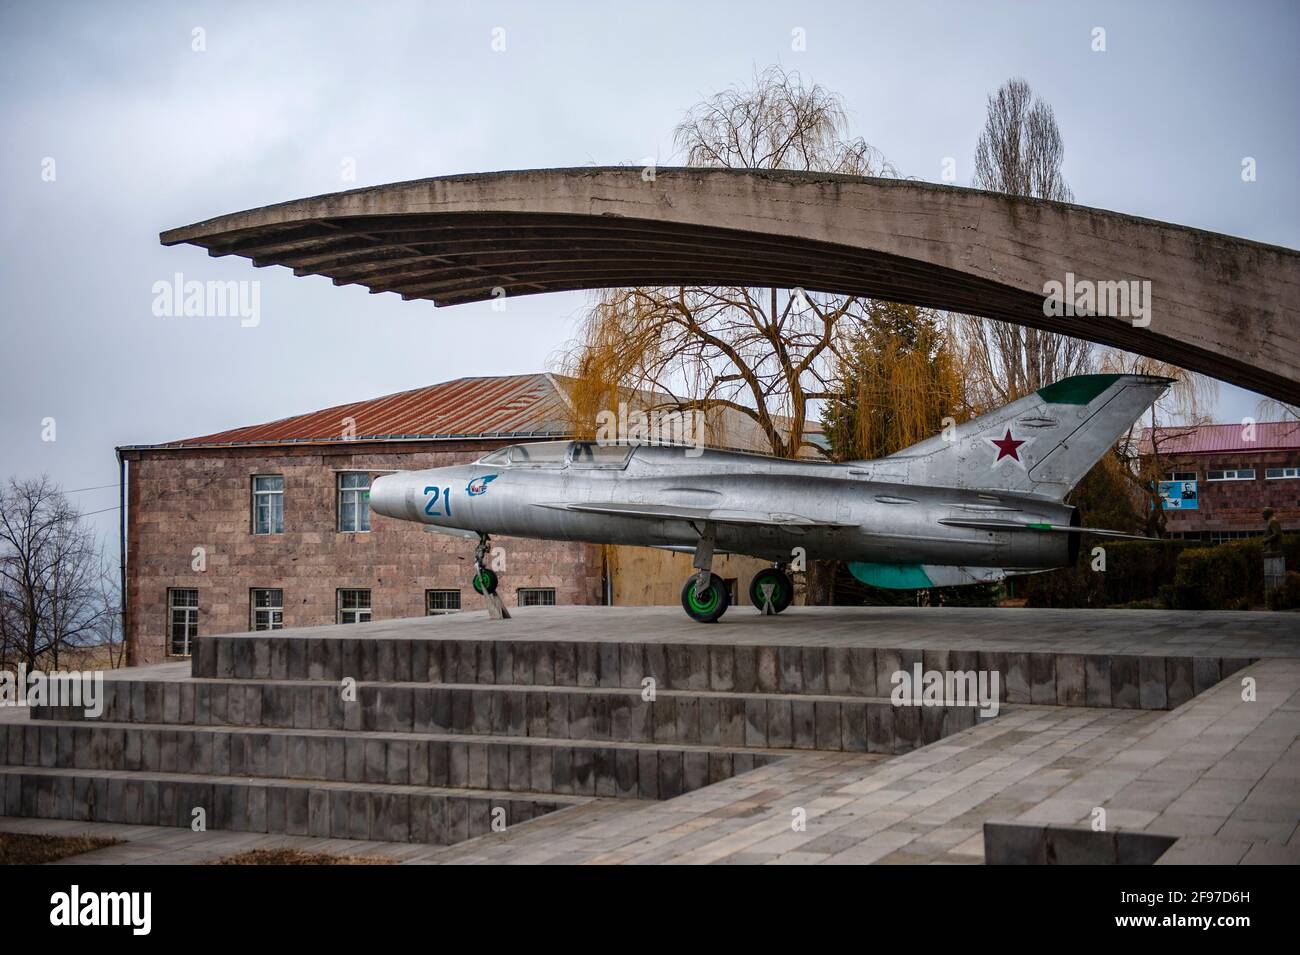 The legendary Mig 21 fighter jet at the Mikoyan brothers museum in Sanahin village, Armenia Stock Photo